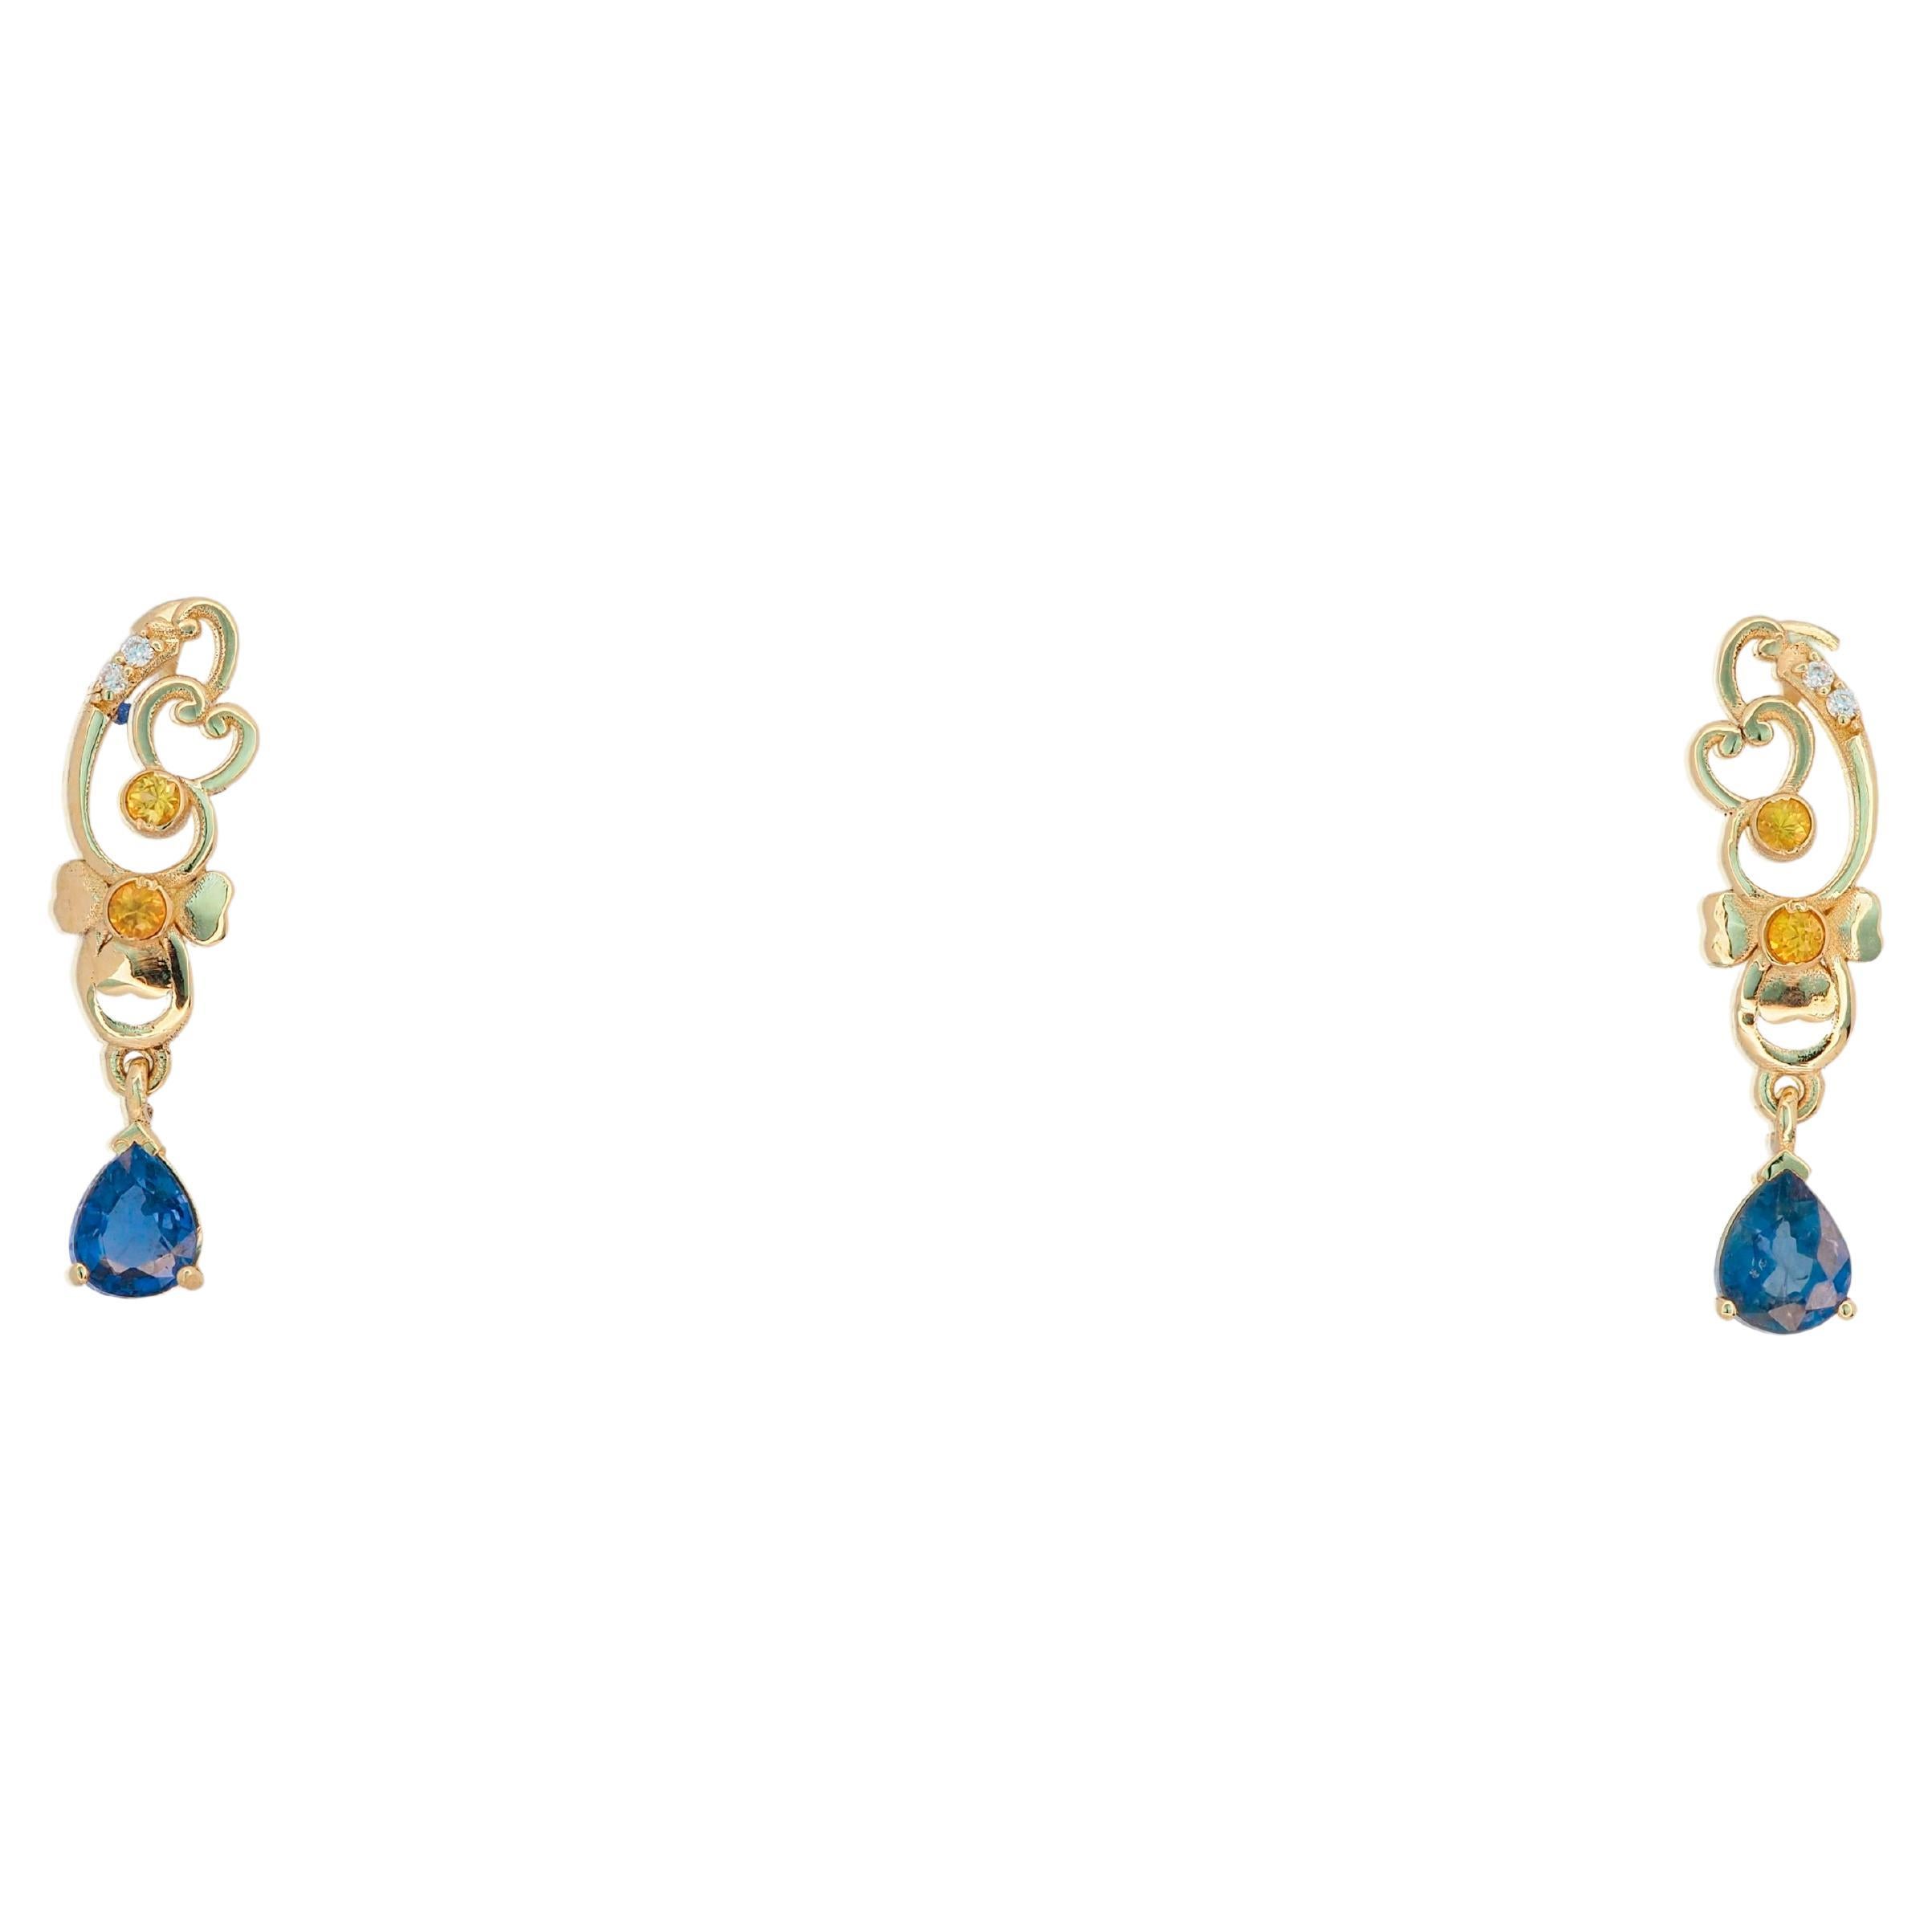 Genuine sapphire earrings studs in 14 kt solid gold. 
Pear sapphire drop earrings. Blue sapphire studs. Statement earrings.

Metal: 14k gold , no hallmark tested in lab.
Weight: 2.3 gr.
Size: 22.5x6mm.

Set with:
Sapphires: blue color, pear cut,